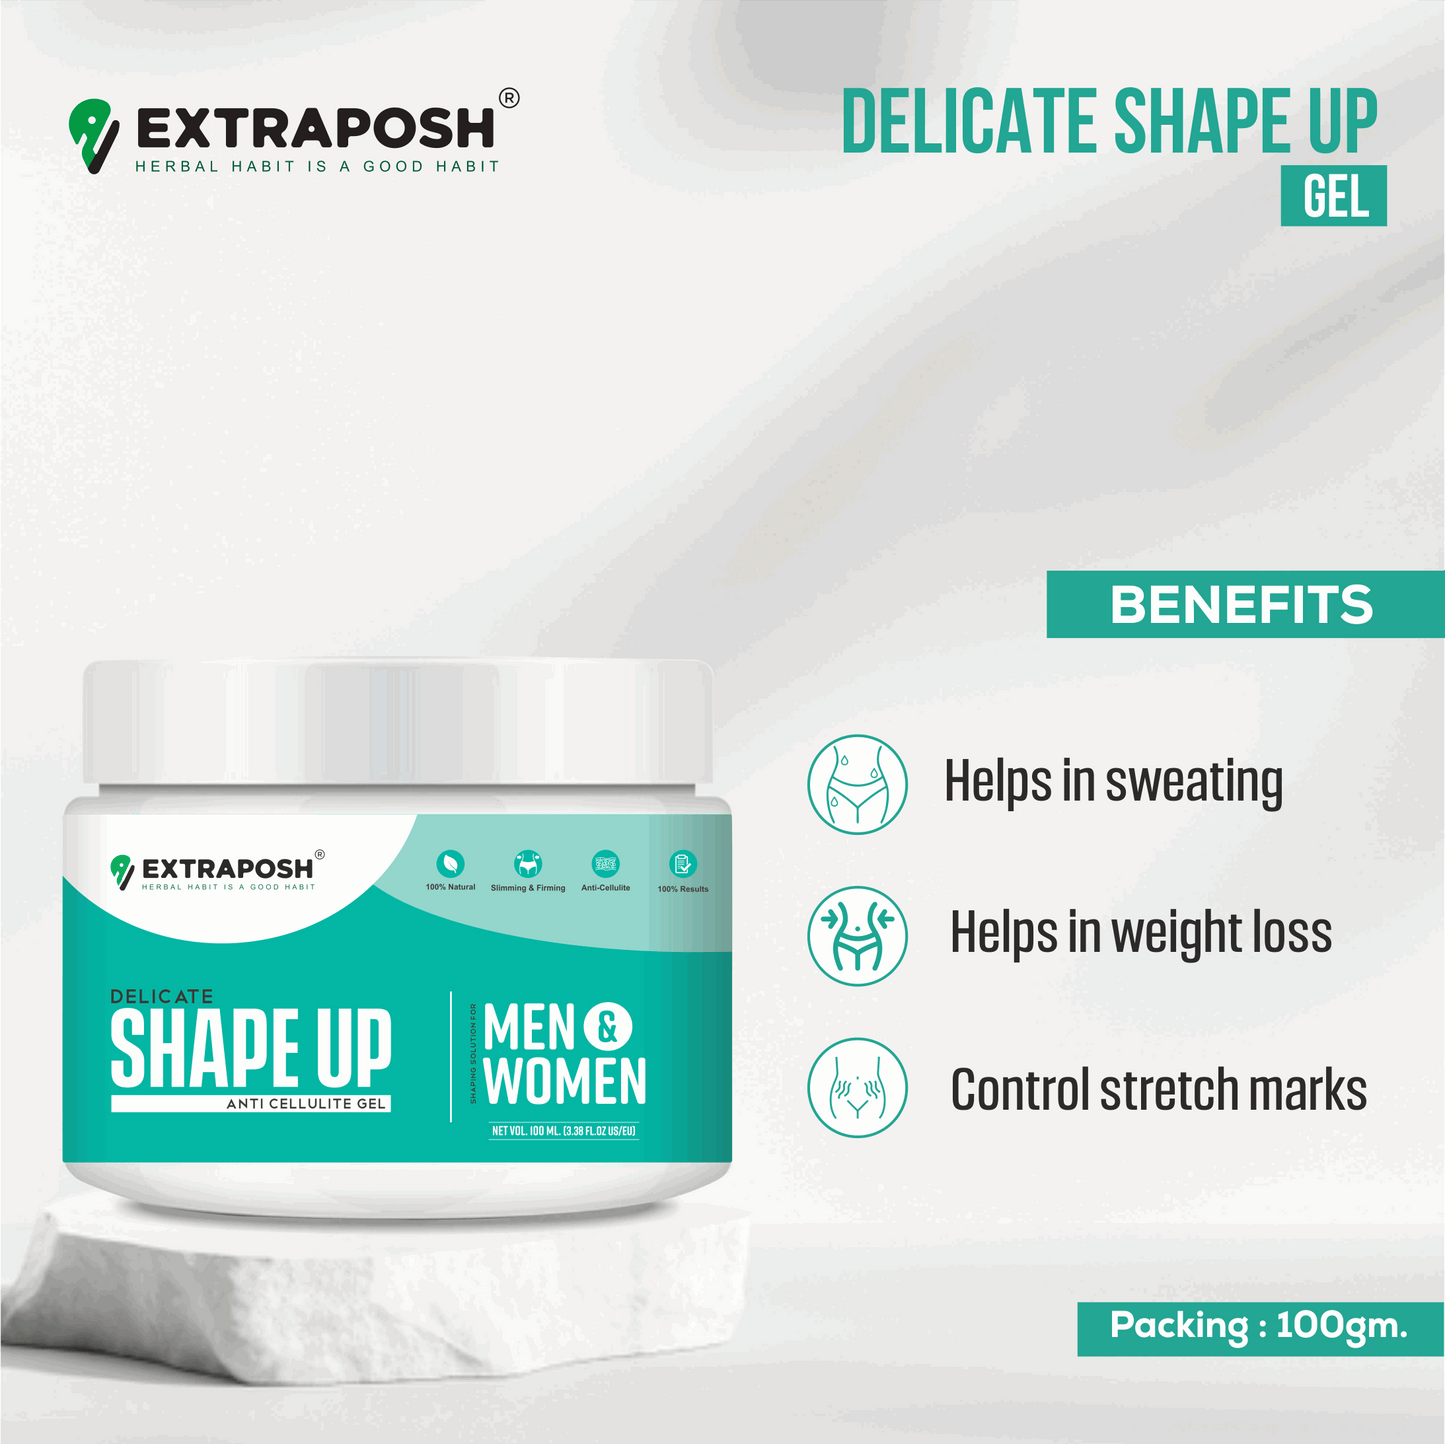 shape up waist & tummy trim gel for men & women helps in sweating and control stretch marks